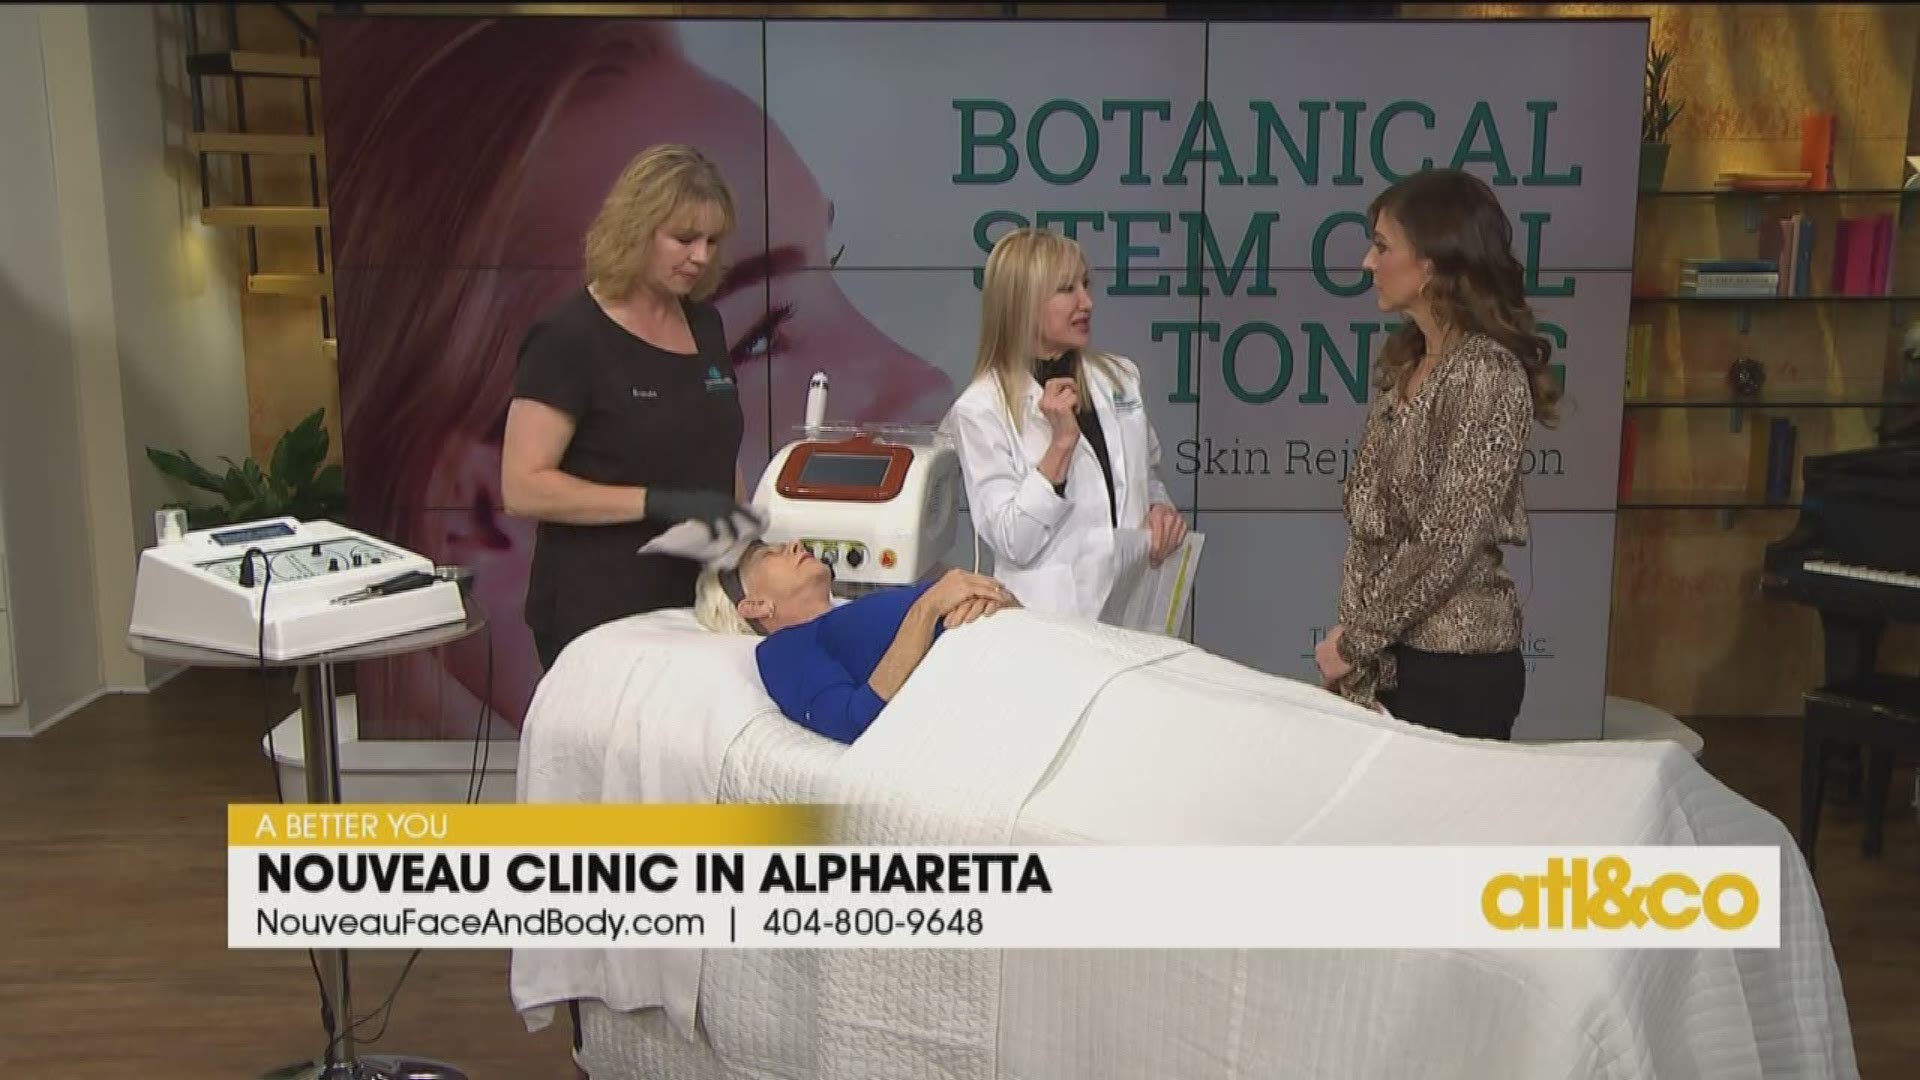 Botanical Stem Cell Toning with Nouveau Clinic